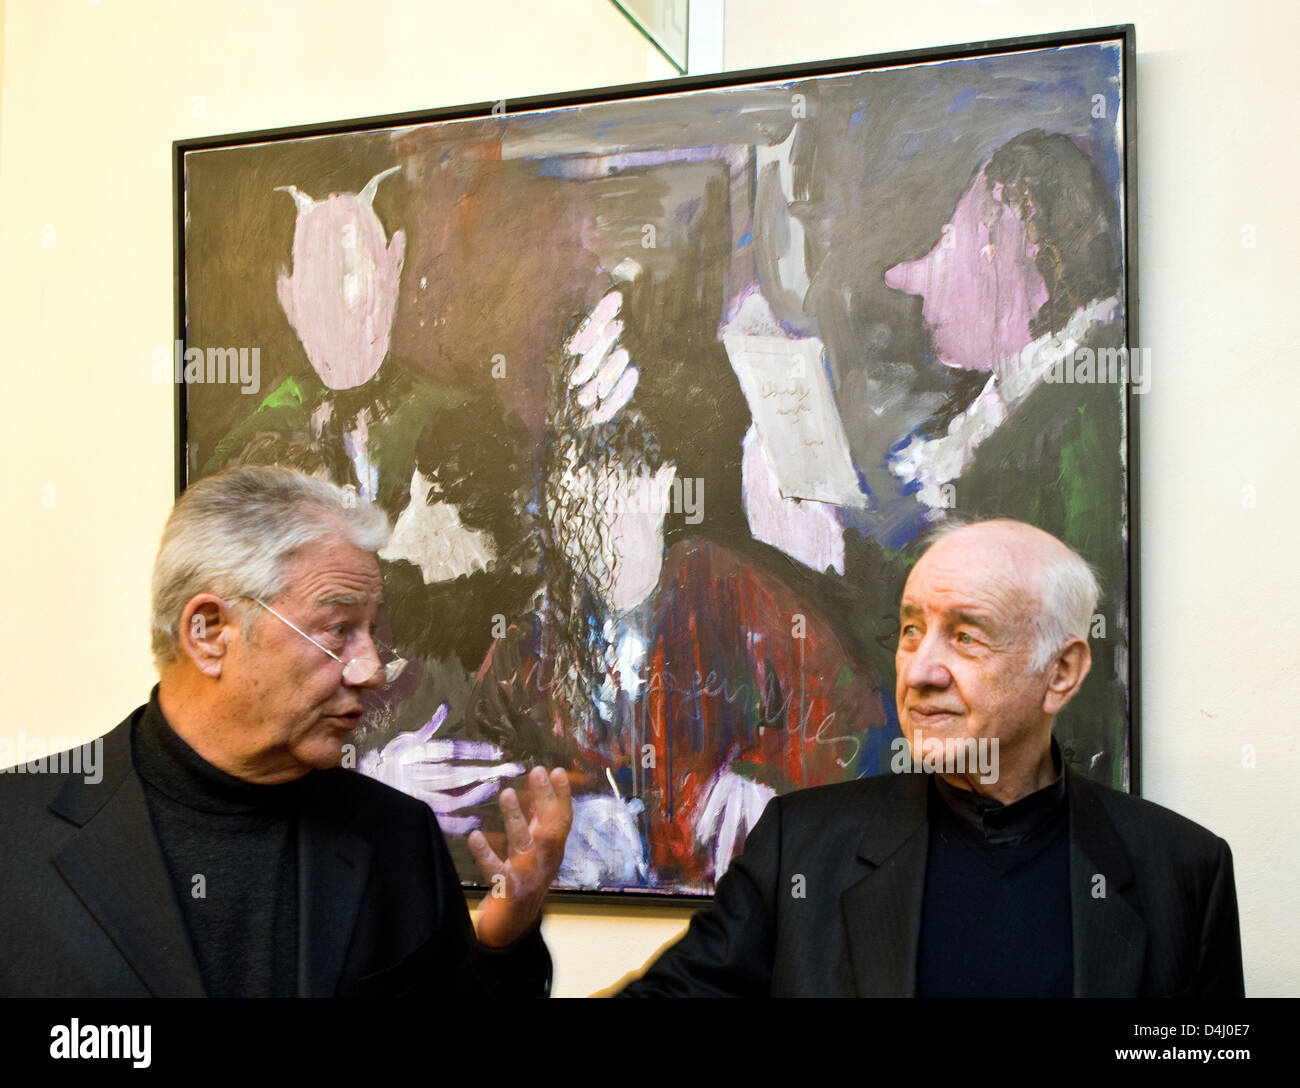 Actor Armin Mueller-Stahl (R) and his friend former Governor of Schleswig-Holstein Bjoern Engholm stand in front of one of Mueller-Stahl's paintings in the Culture Church in Neuruppin, Germany, 14 March 2013. This evening, the exhibition of pictures by Armin Mueller-Stahl opens with around 60 works and is open until 31 May. One of the themes is 'Faust. The autodidact has also drawn a portrait of Theodor Fontane, who was born in Neuruppin. Photo: PATRICK PLEUL Stock Photo